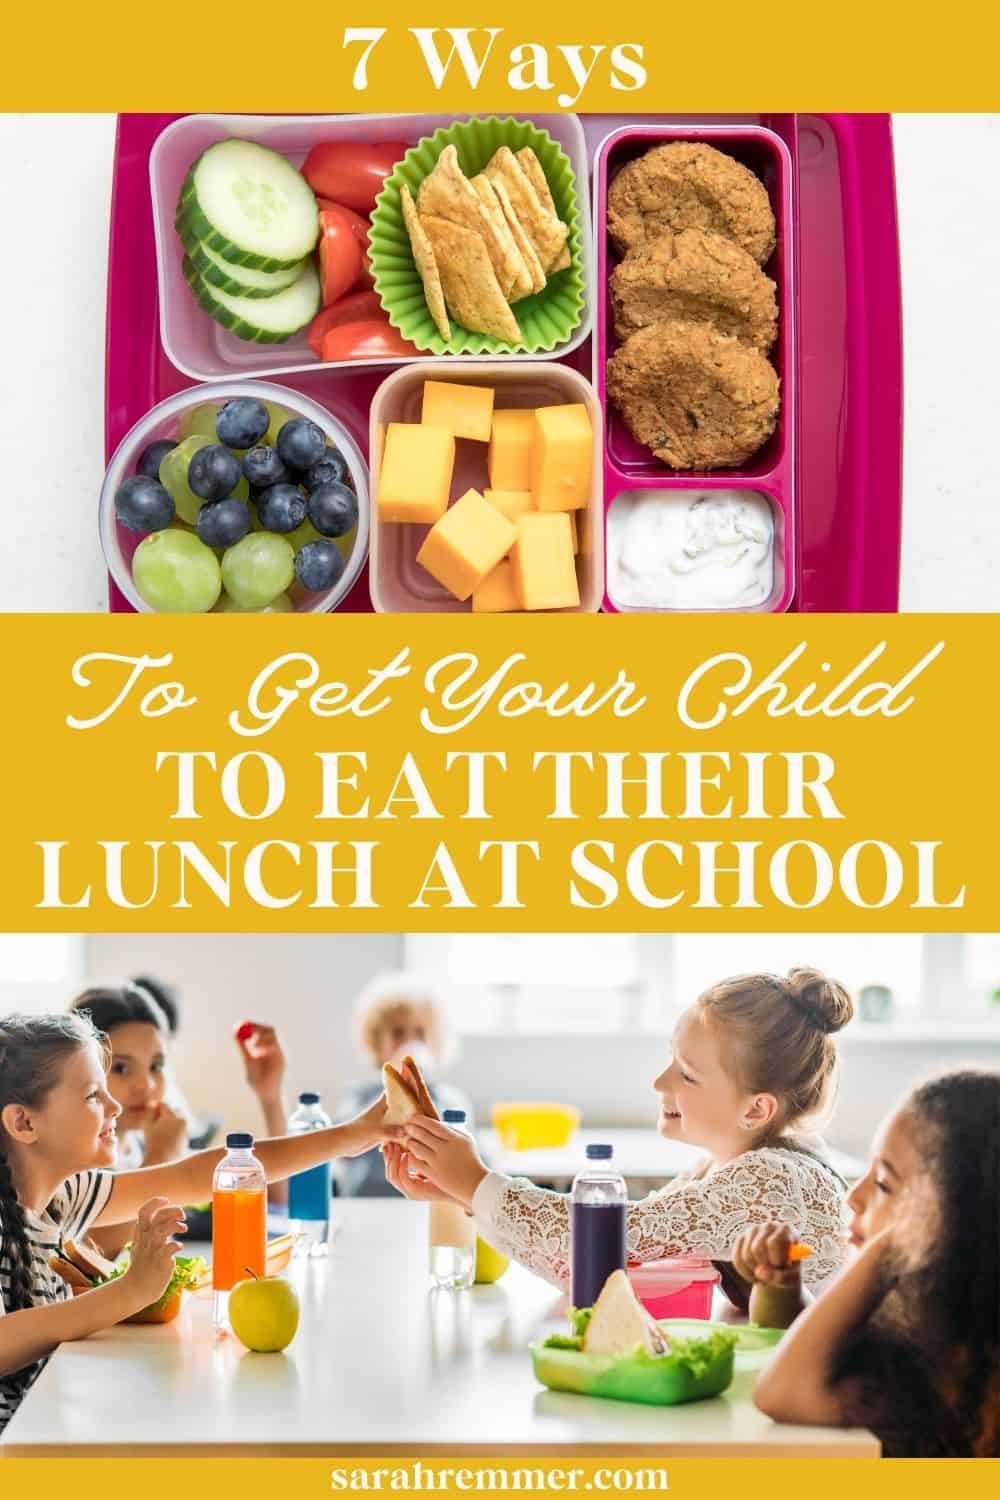 After reading one of a fellow blogger's posts on how her preschooler refuses to eat her lunch, I thought I'd "reply" by writing a post with some ideas. Kids refusing to eat their lunch is a common struggle faced by many parents, so here are 7 ways to get your child to eat their school lunch!